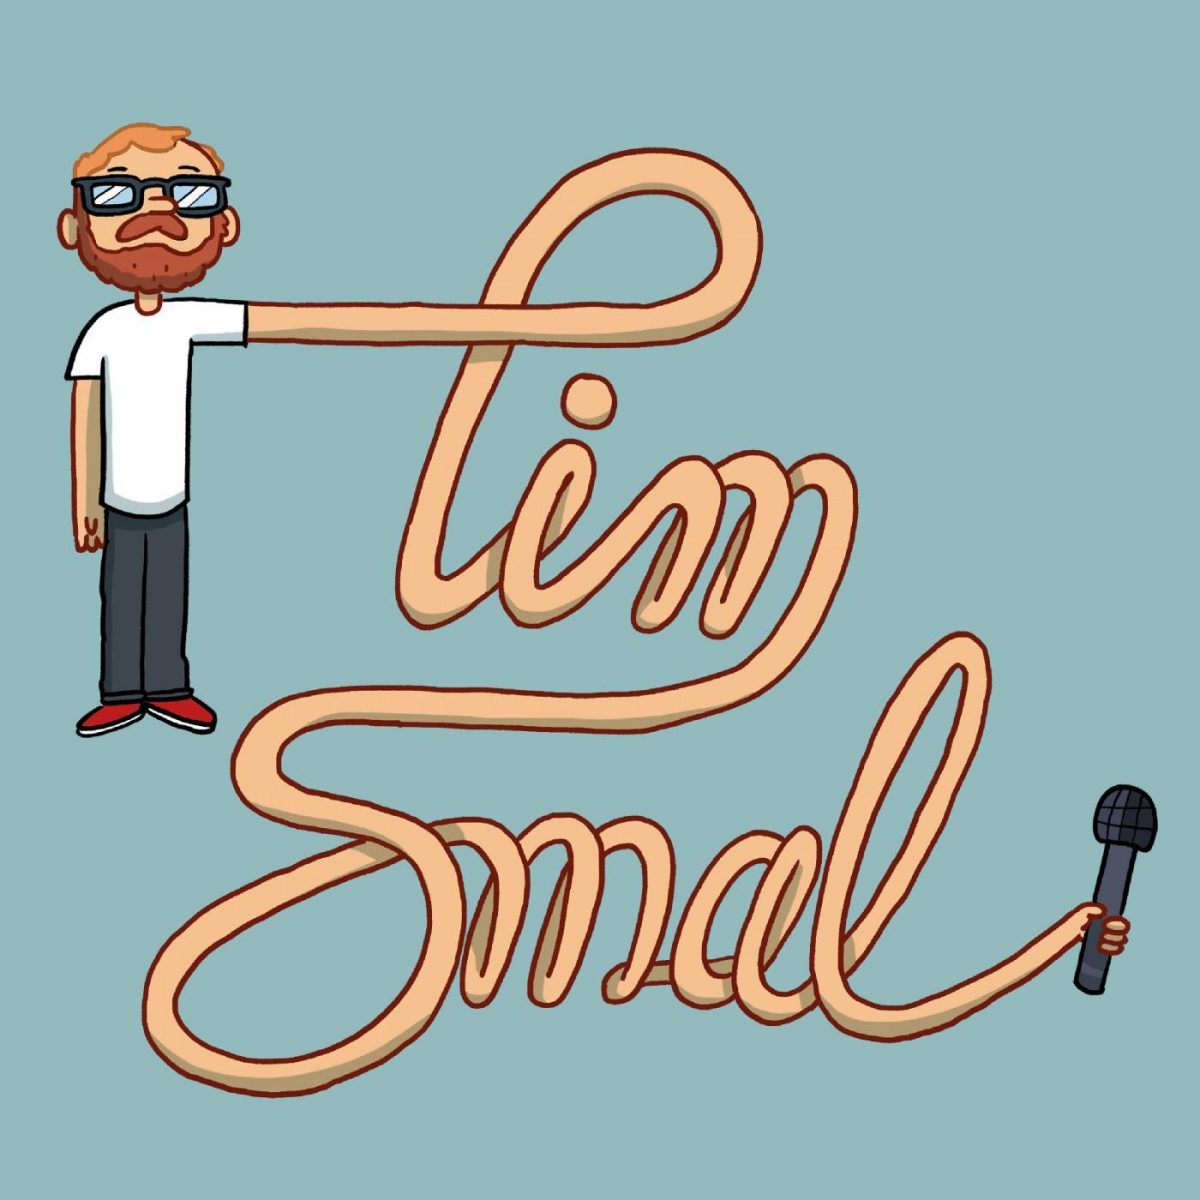 The Tim Smal Show